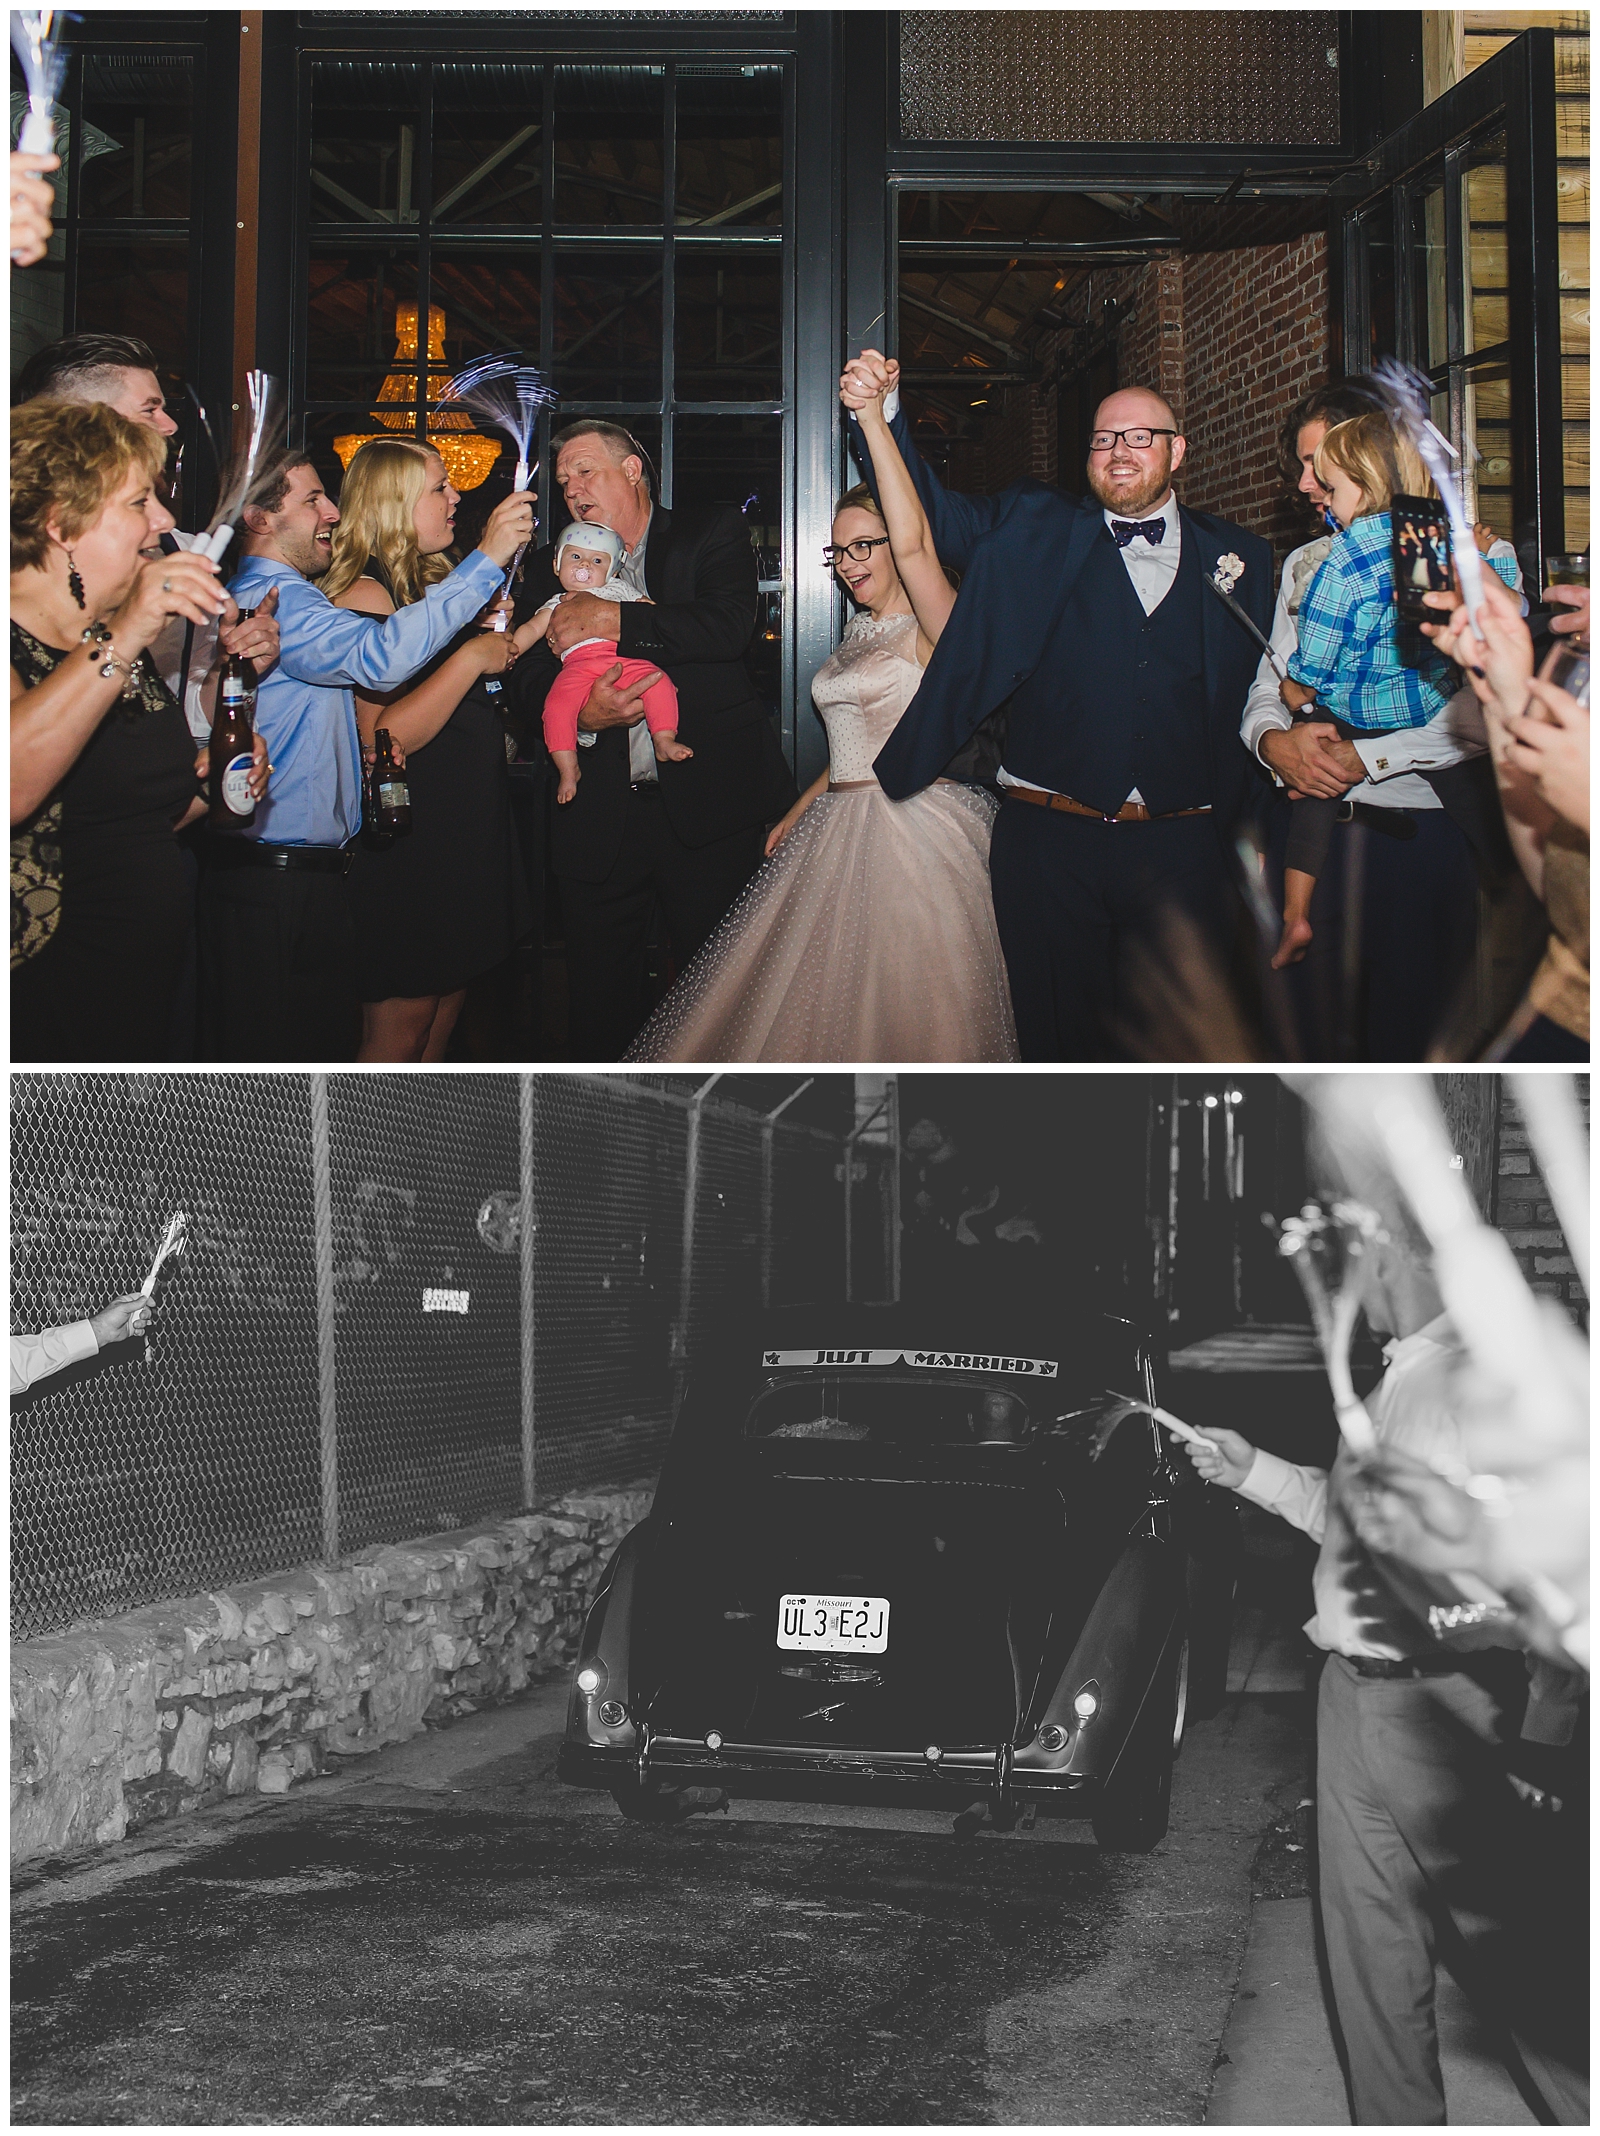 Wedding photography at The Guild by Kansas City wedding photographers Wisdom-Watson Weddings.